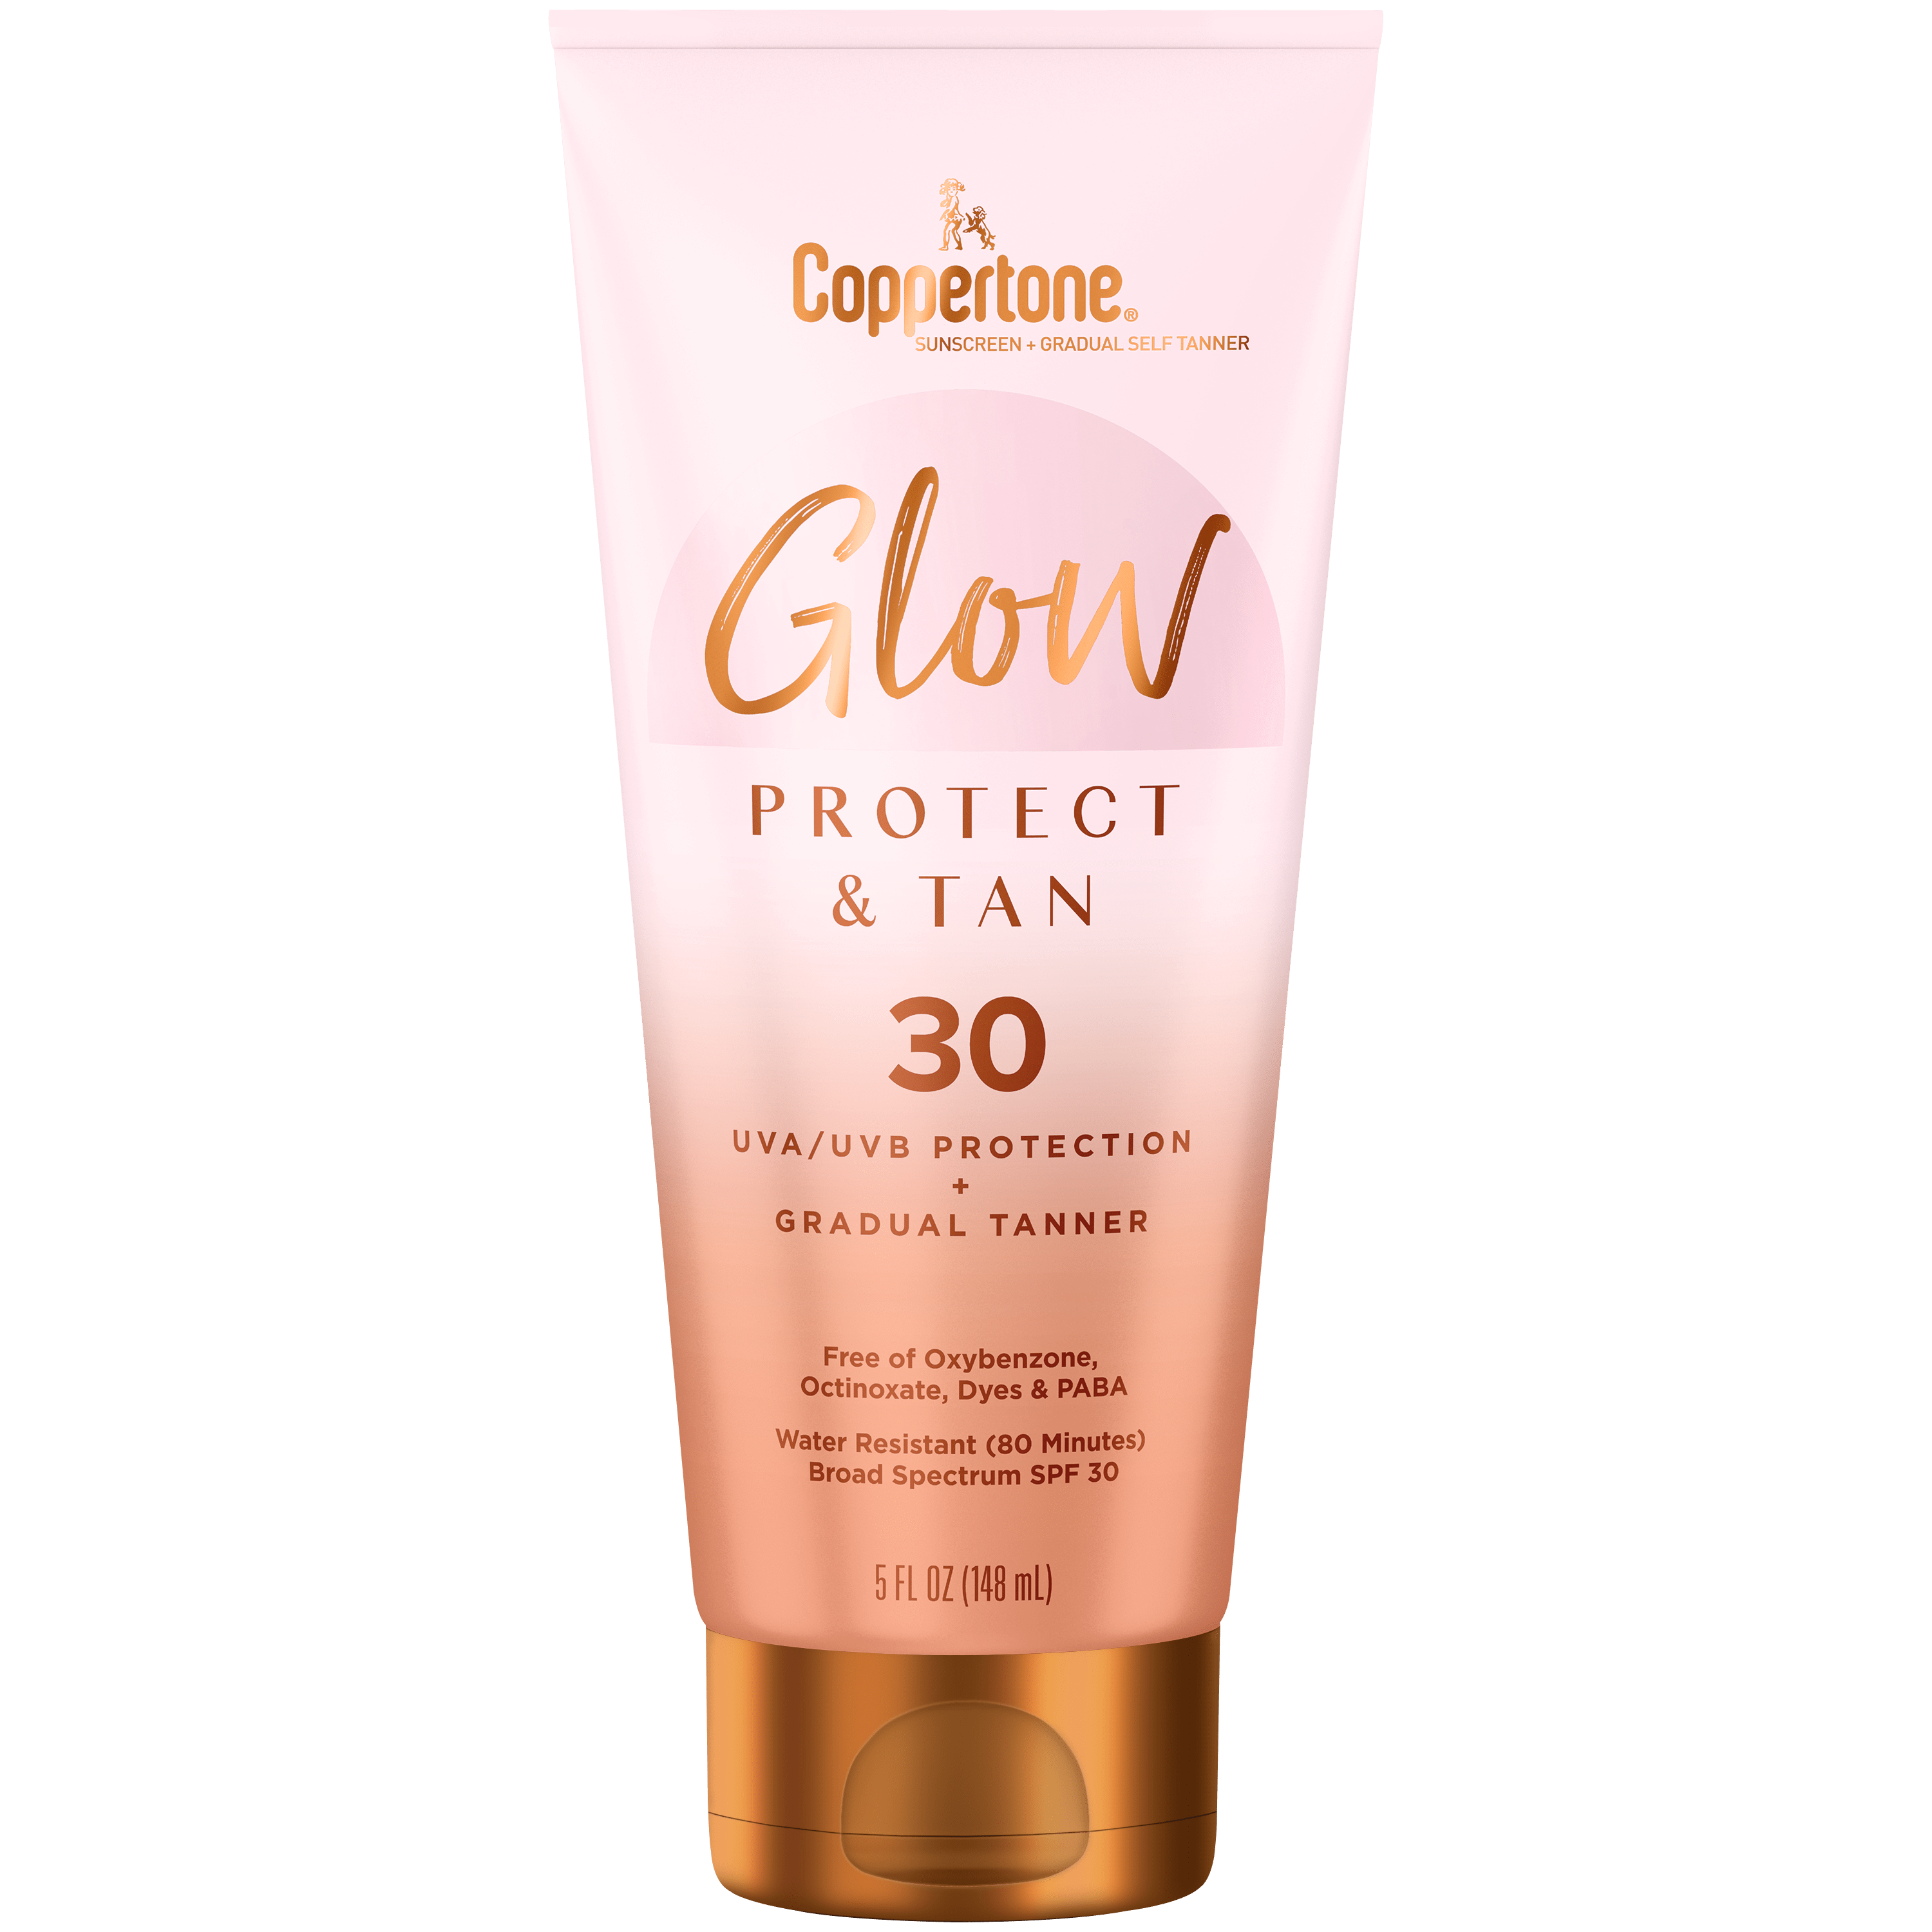 Coppertone Glow Protect and Tan Sunscreen Lotion + Gradual Self Tanner, SPF 30